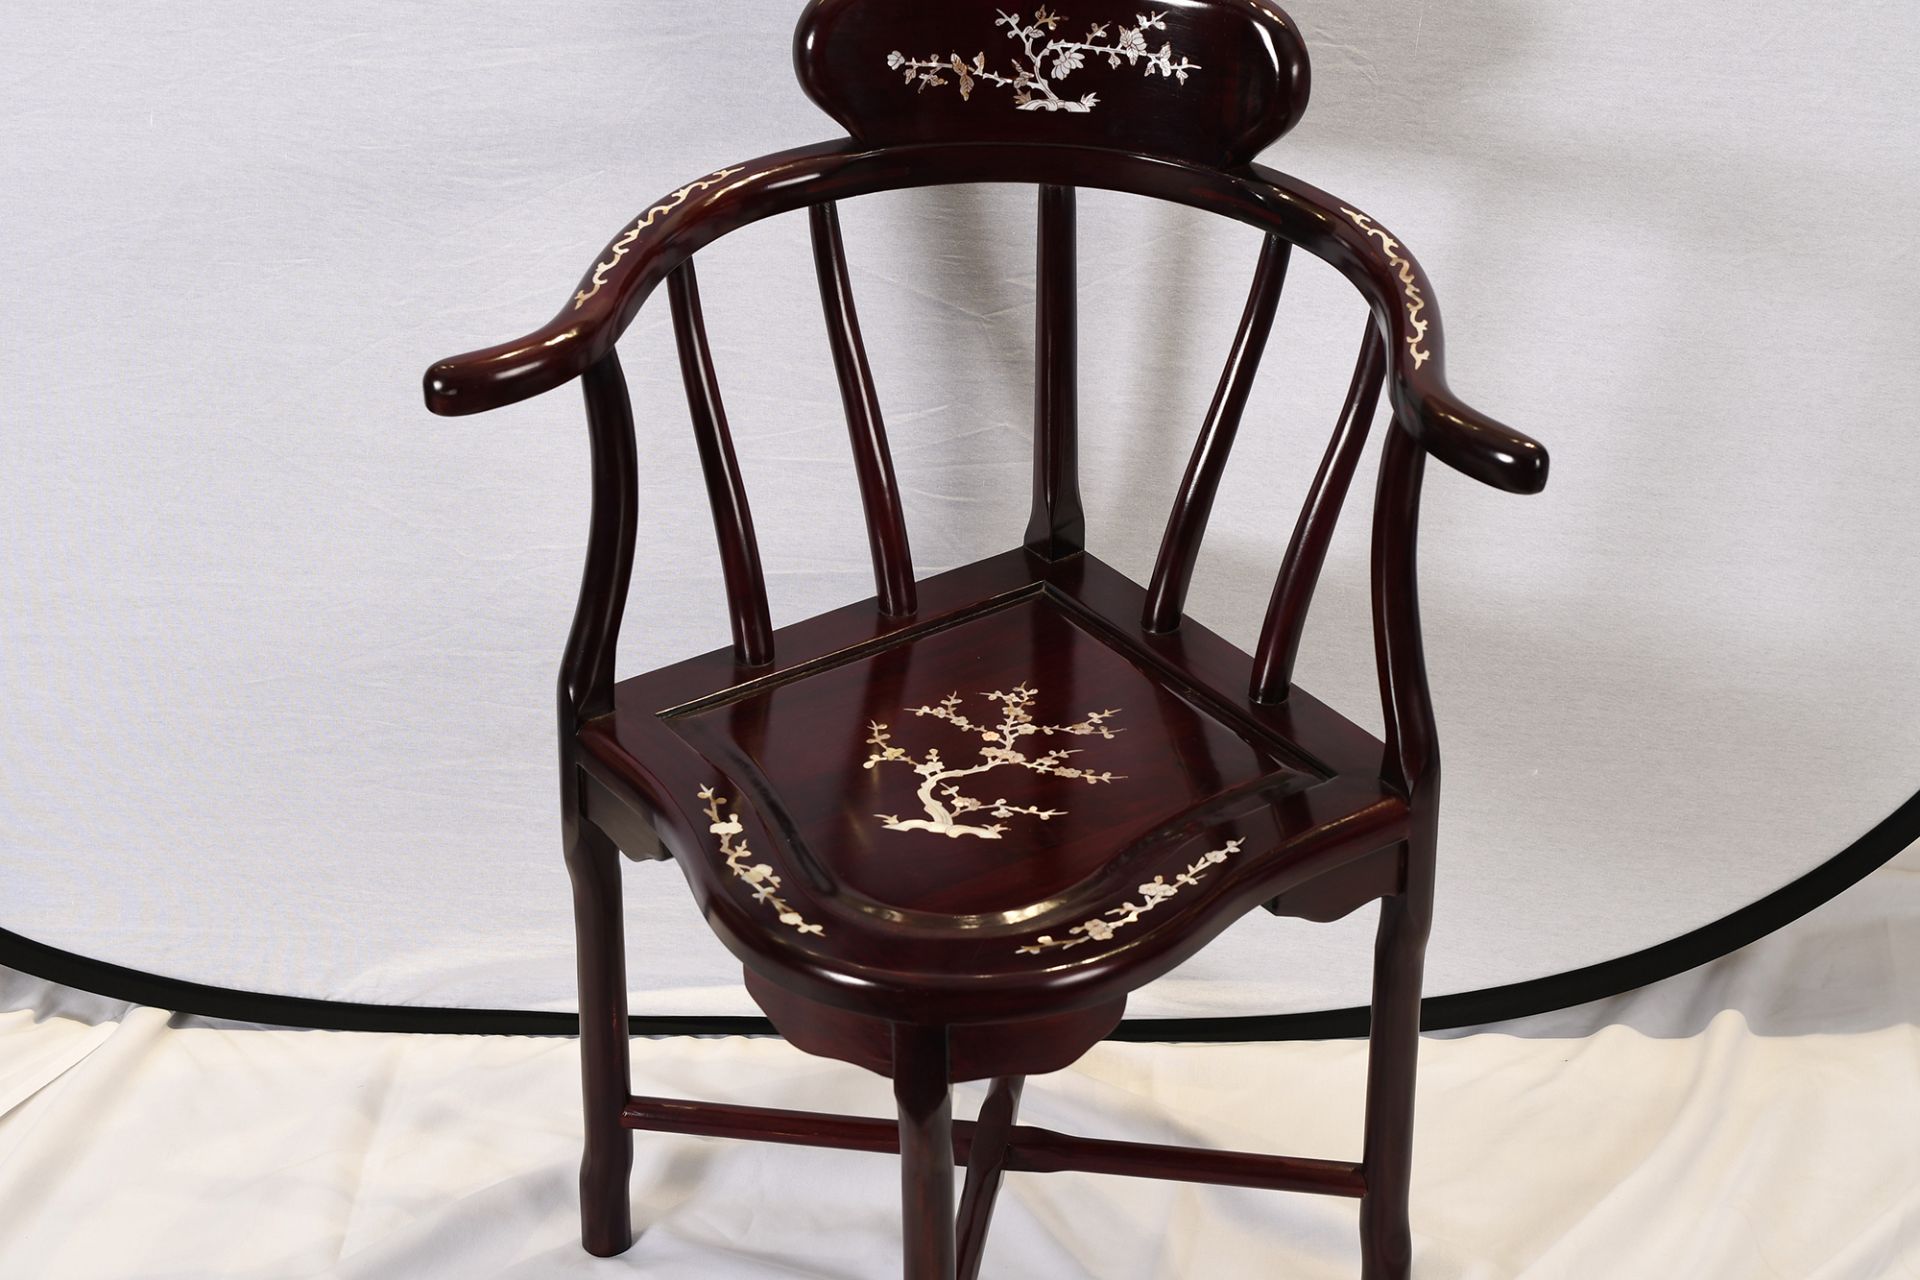 Mother Of Pearl Inlaid Chair - Image 6 of 6